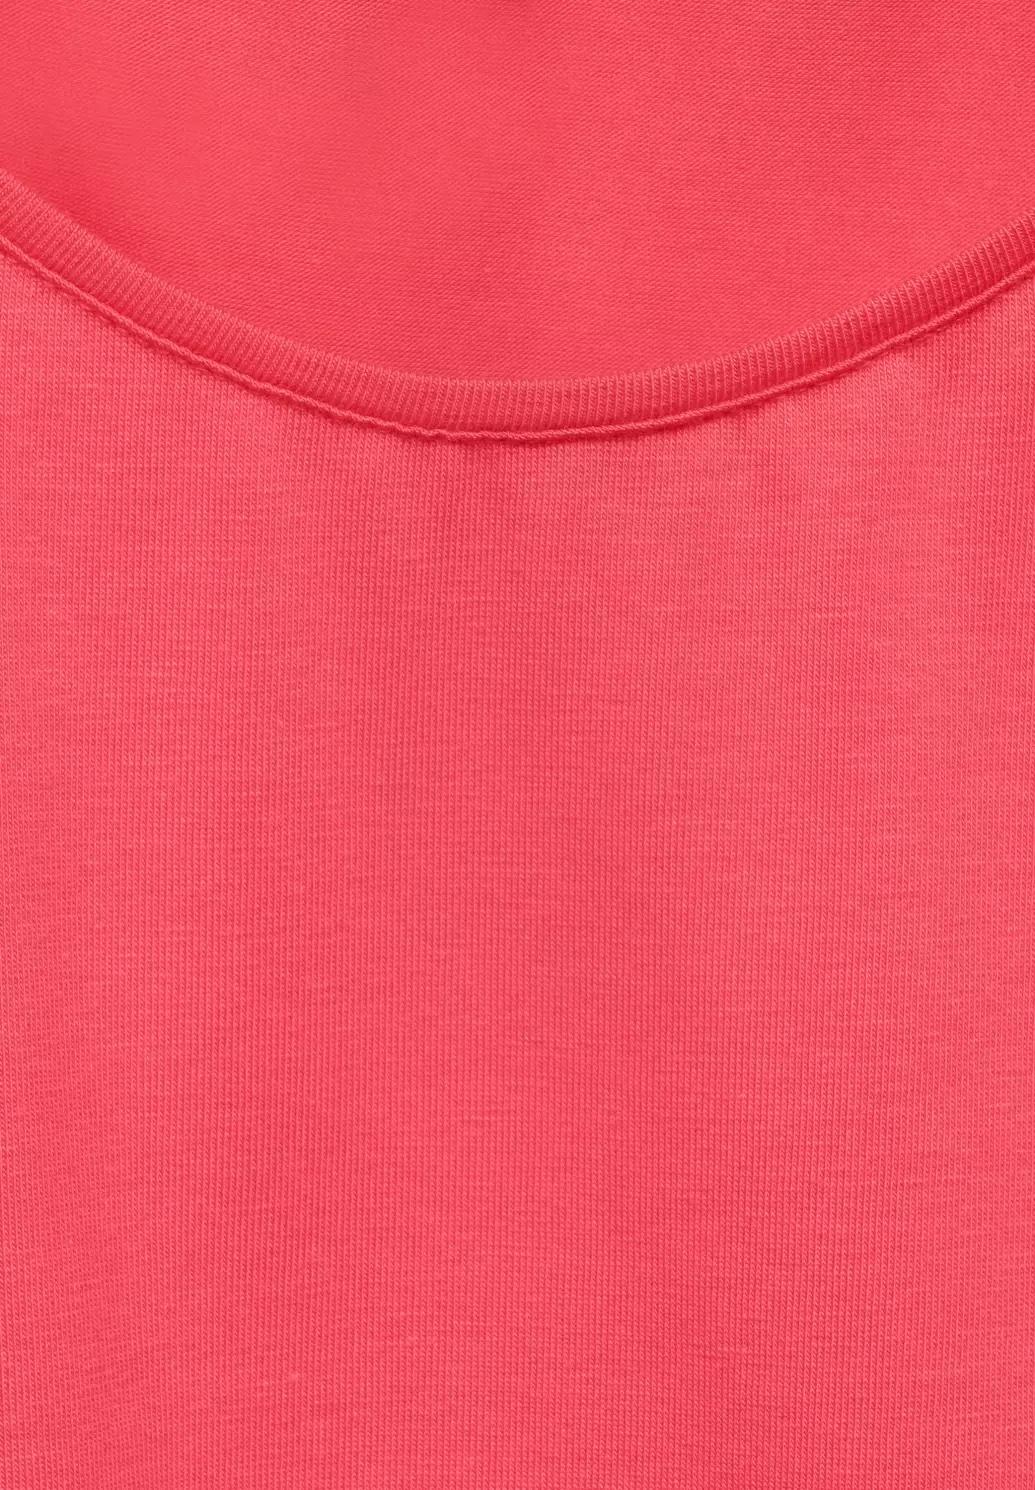 Street One top ANNI, coral